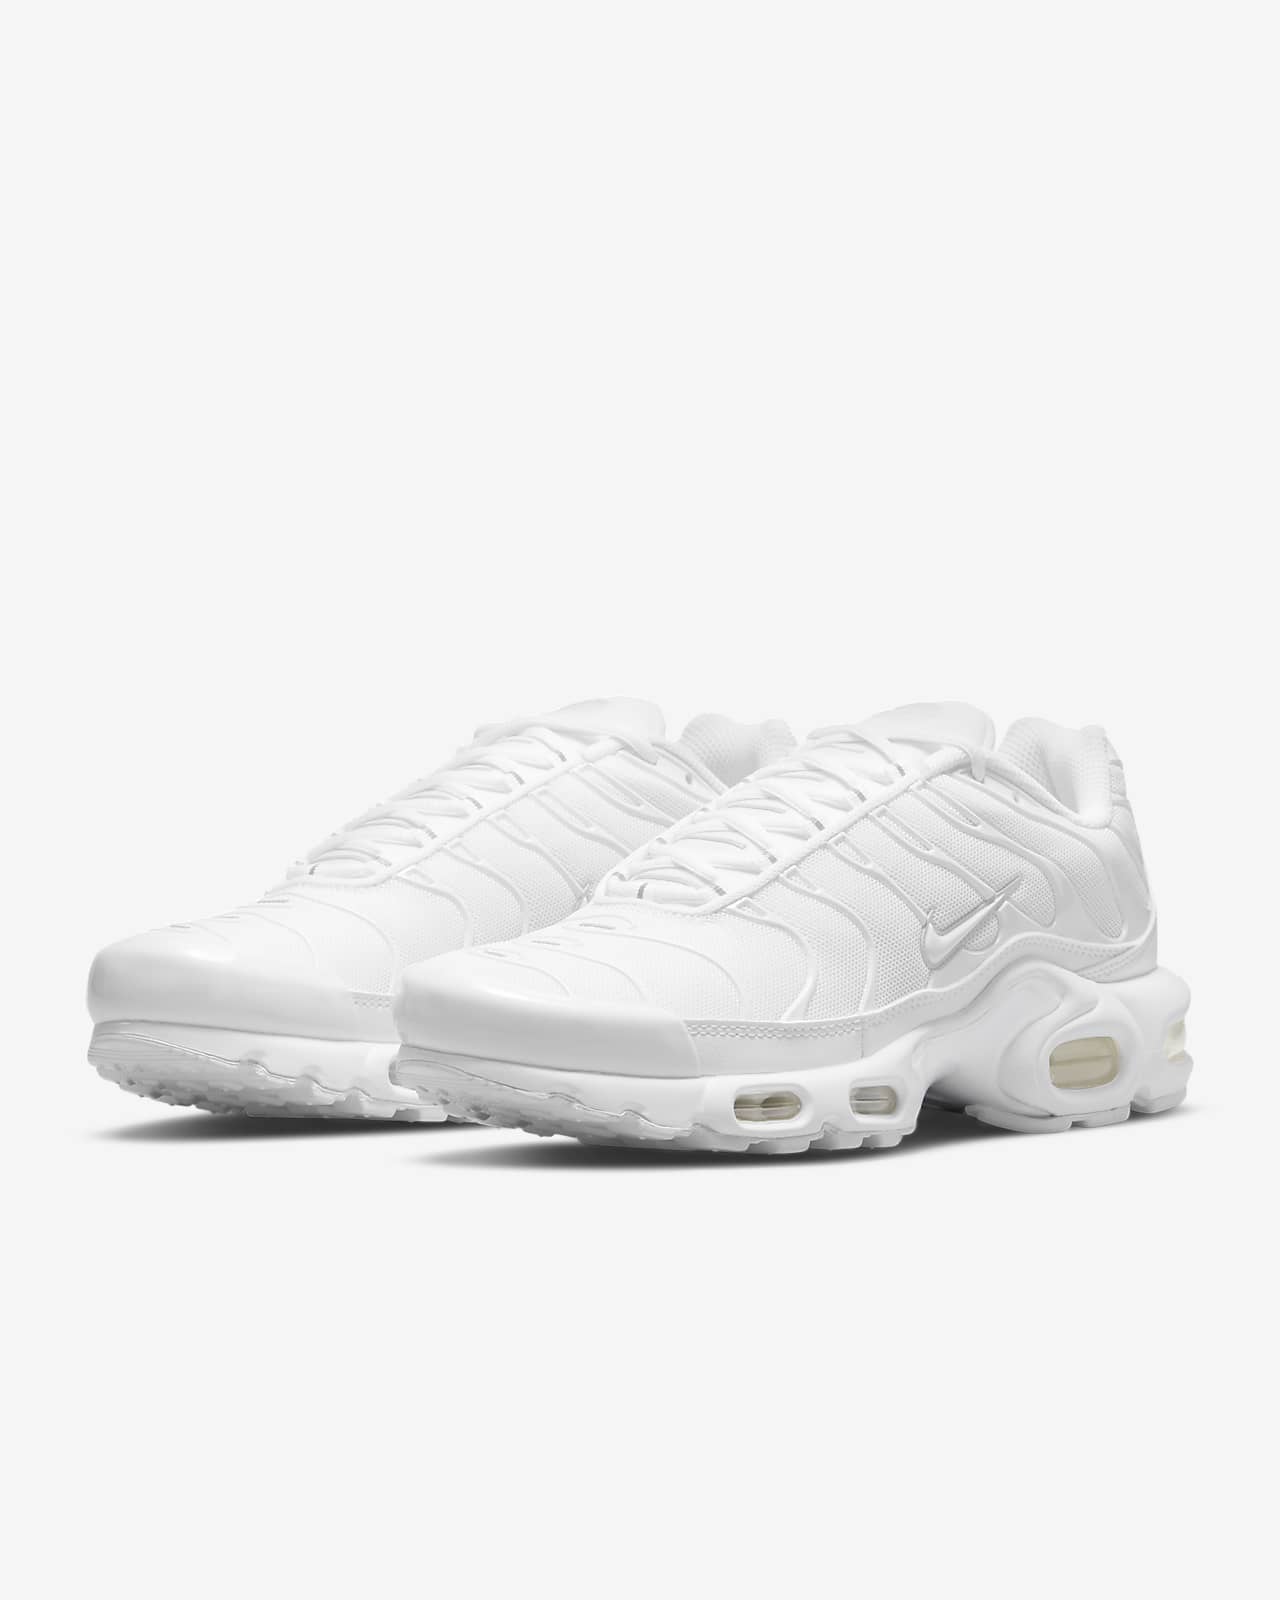 lottery confirm deficiency Nike Air Max Plus Women's Shoes. Nike.com